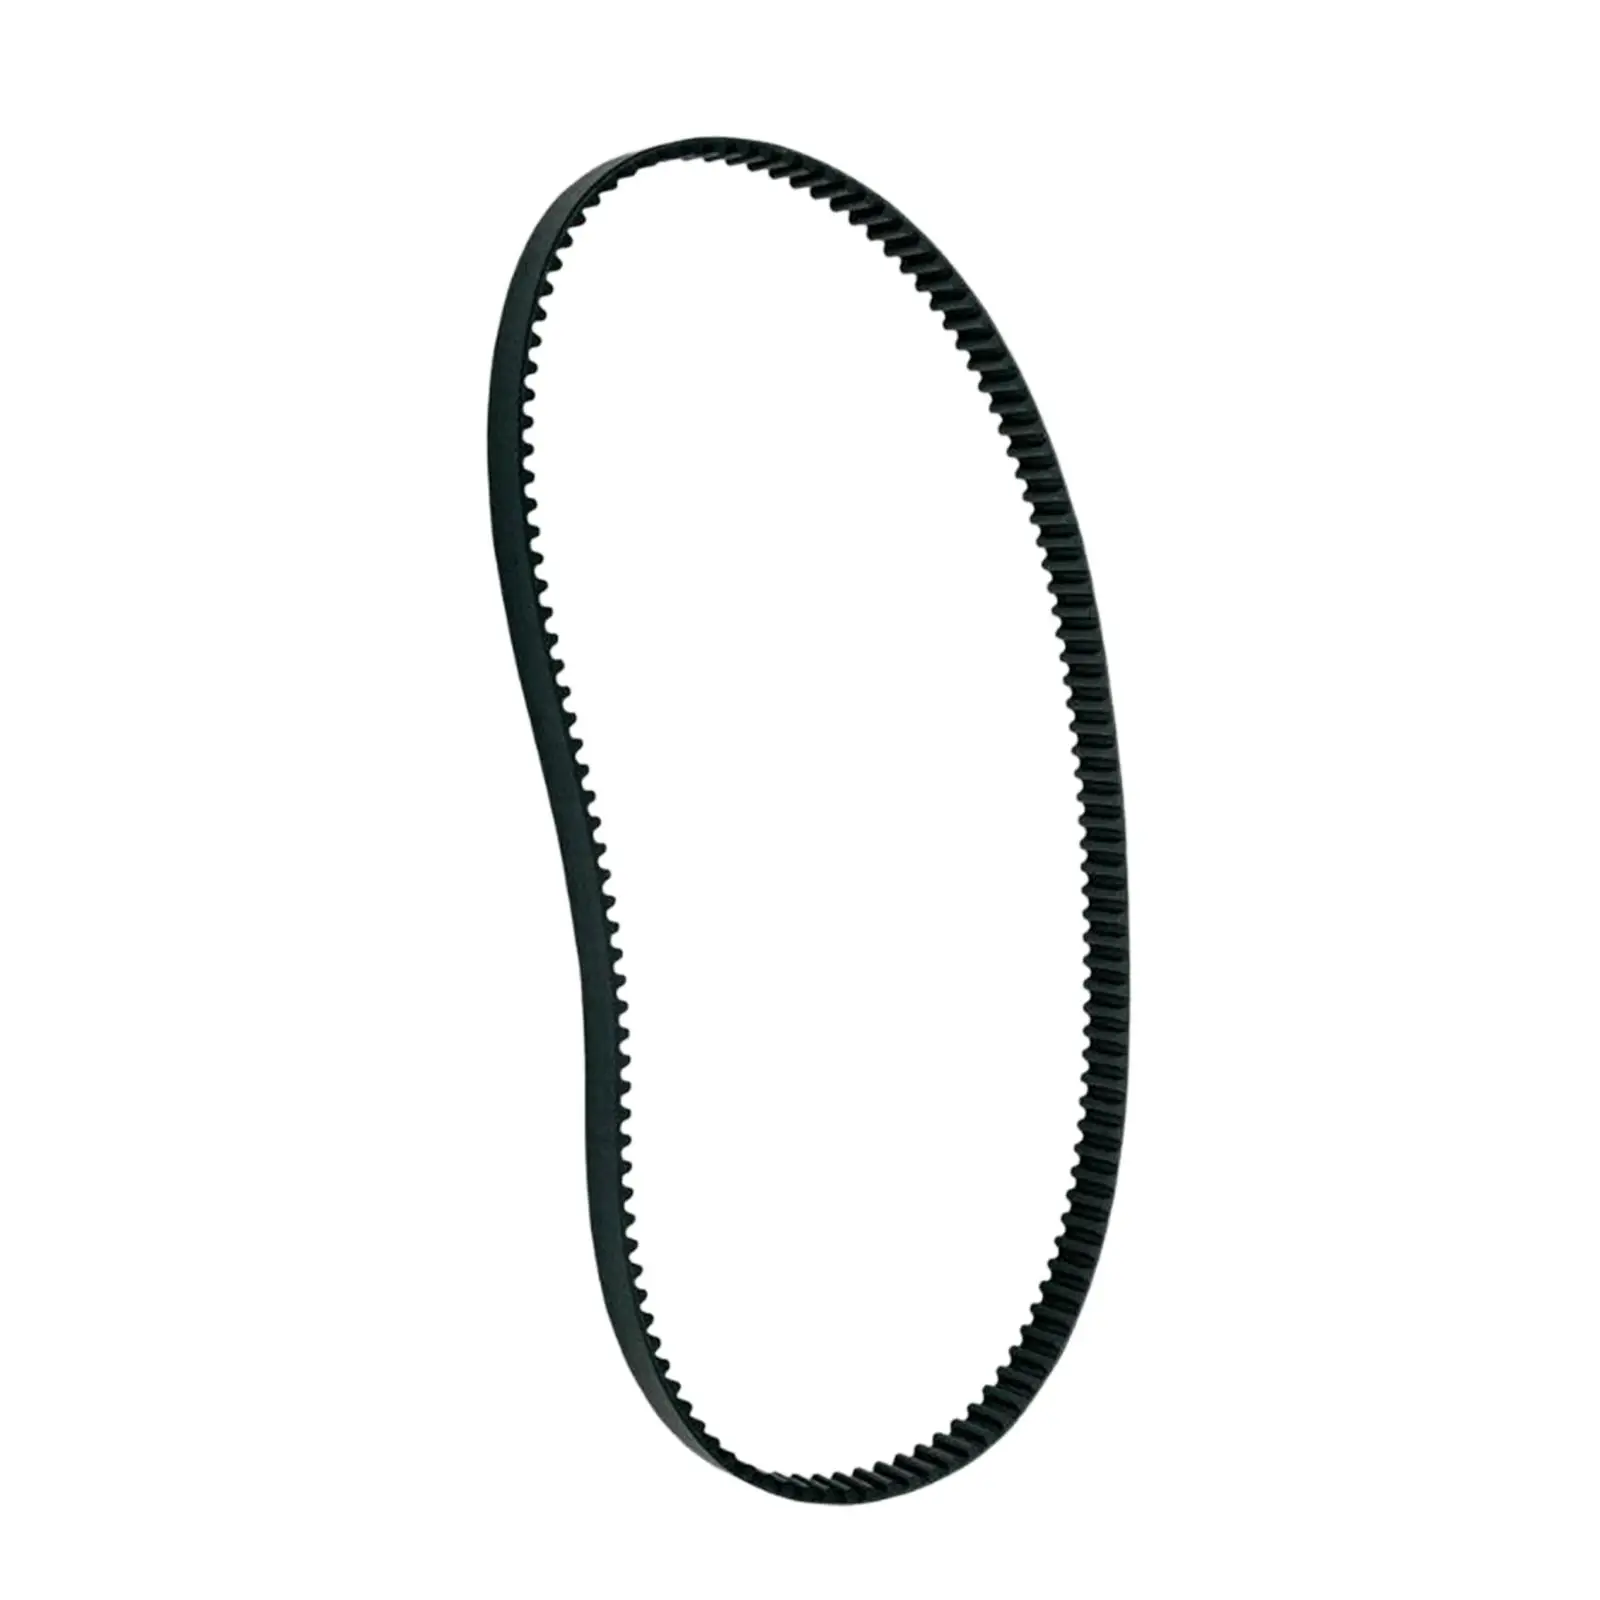 

Rear Drive Belt Motorcycle Accessories 1" 130 Tooth Bdlspcb-130-1 High Performance Easy Installation Rubber Replace Parts